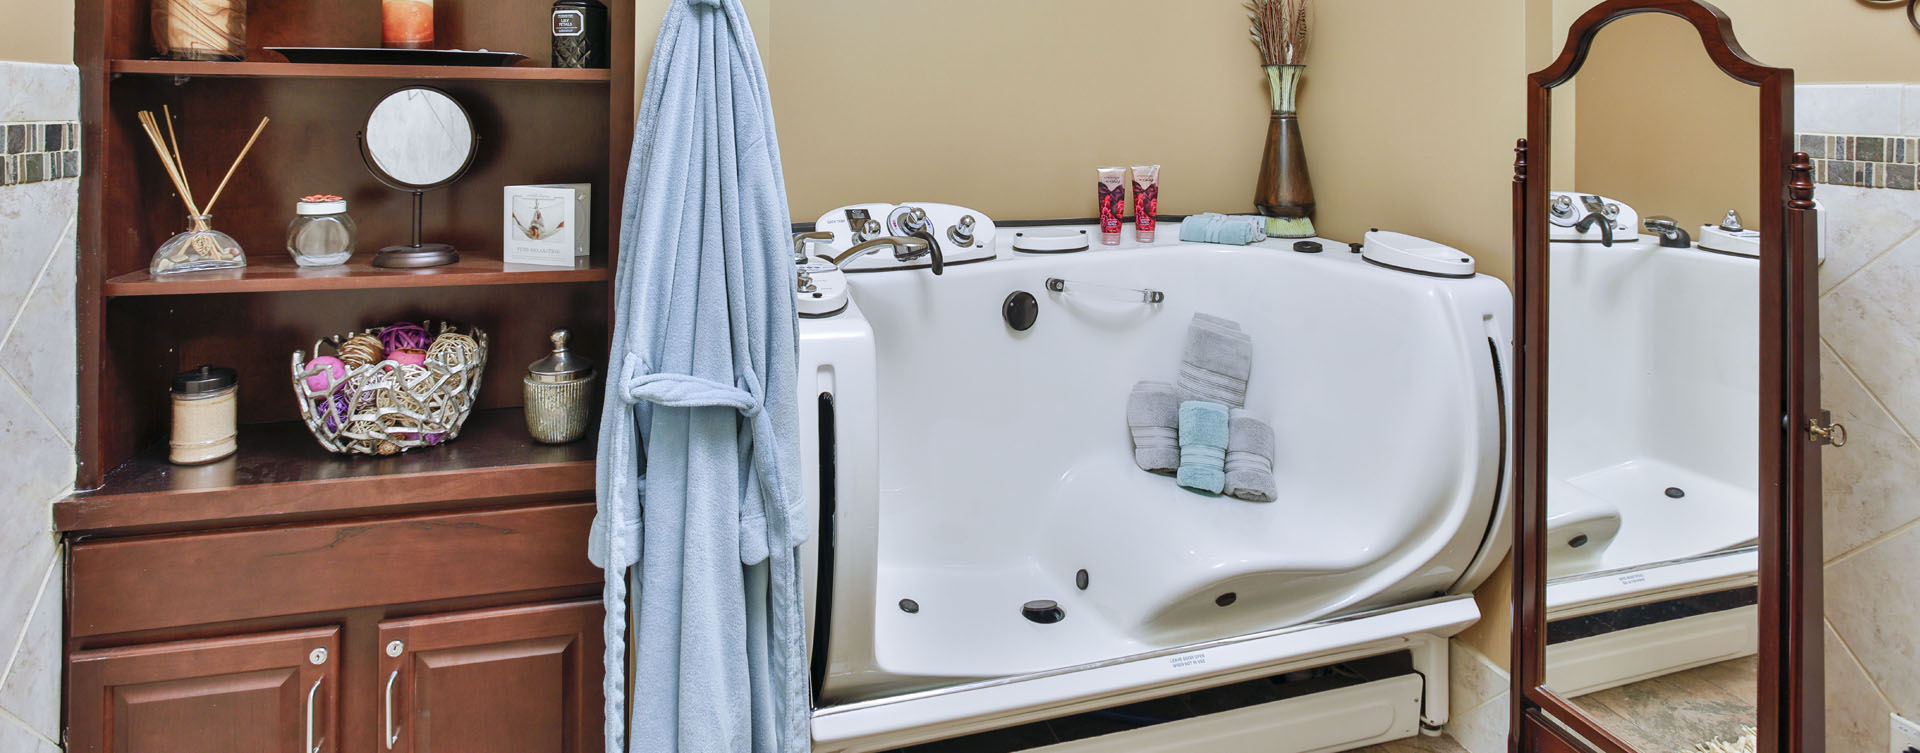 With an easy access design, our whirlpool allows you to enjoy a warm bath safely and comfortably at Bickford of Greenwood